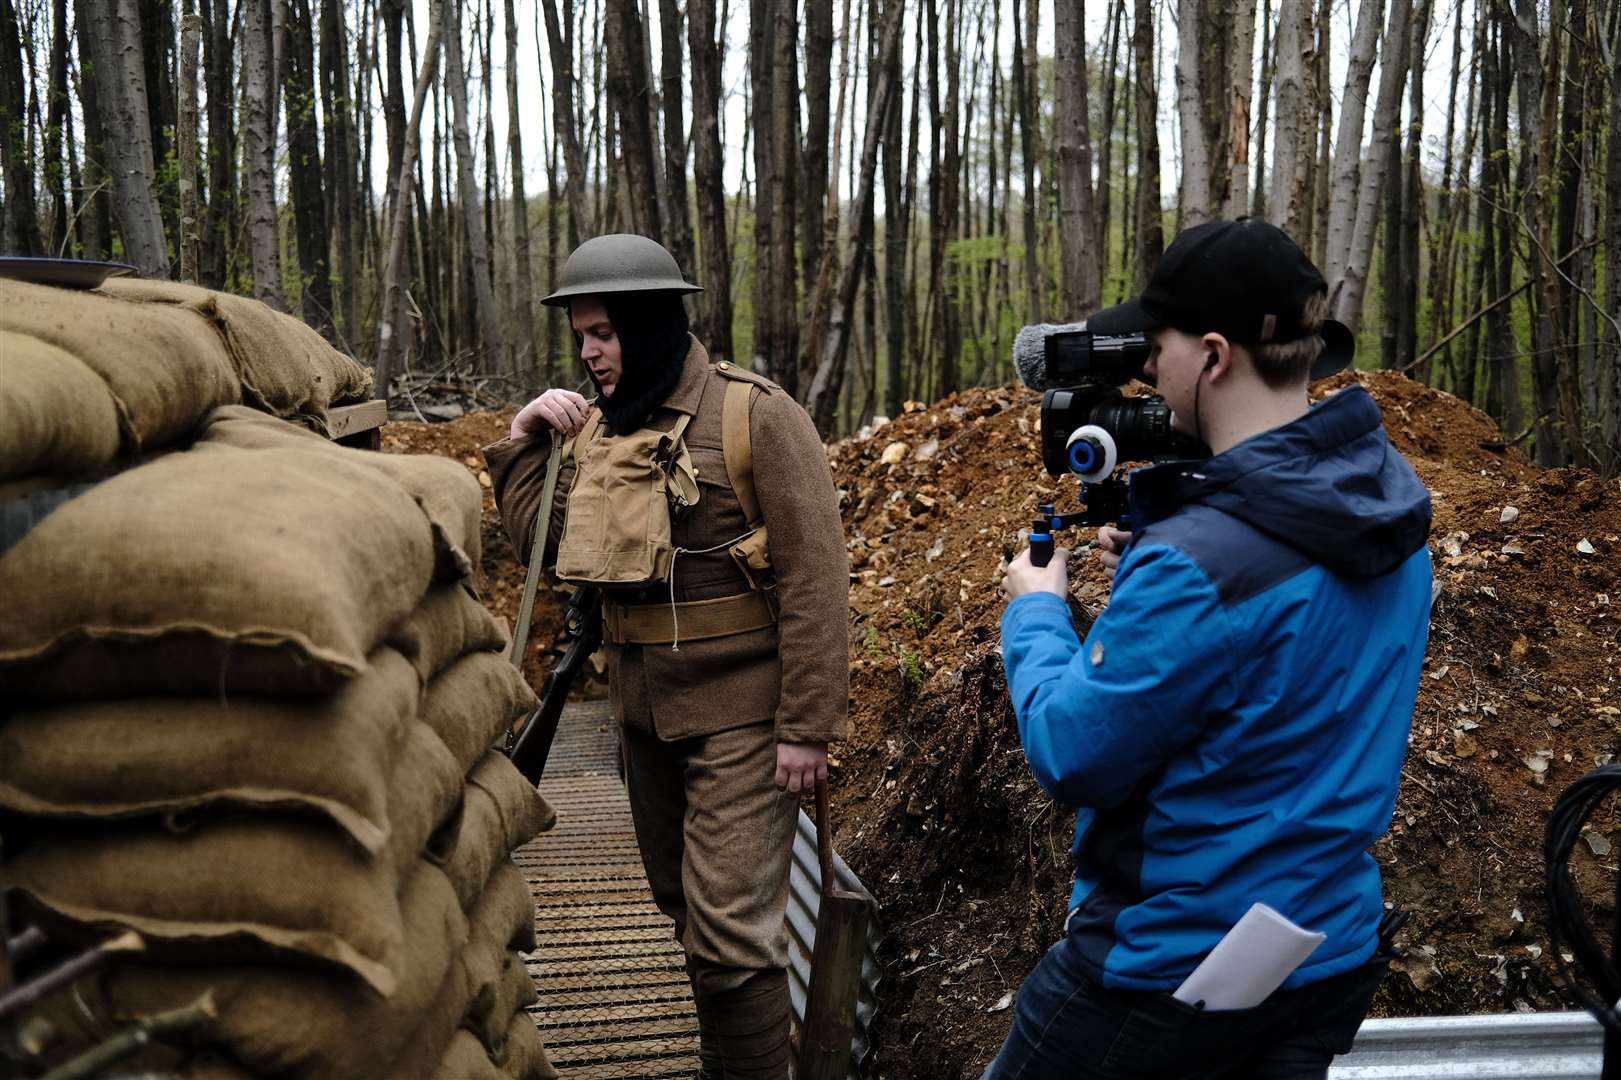 Behind the scenes at Detling showground for the film The Fronts of War